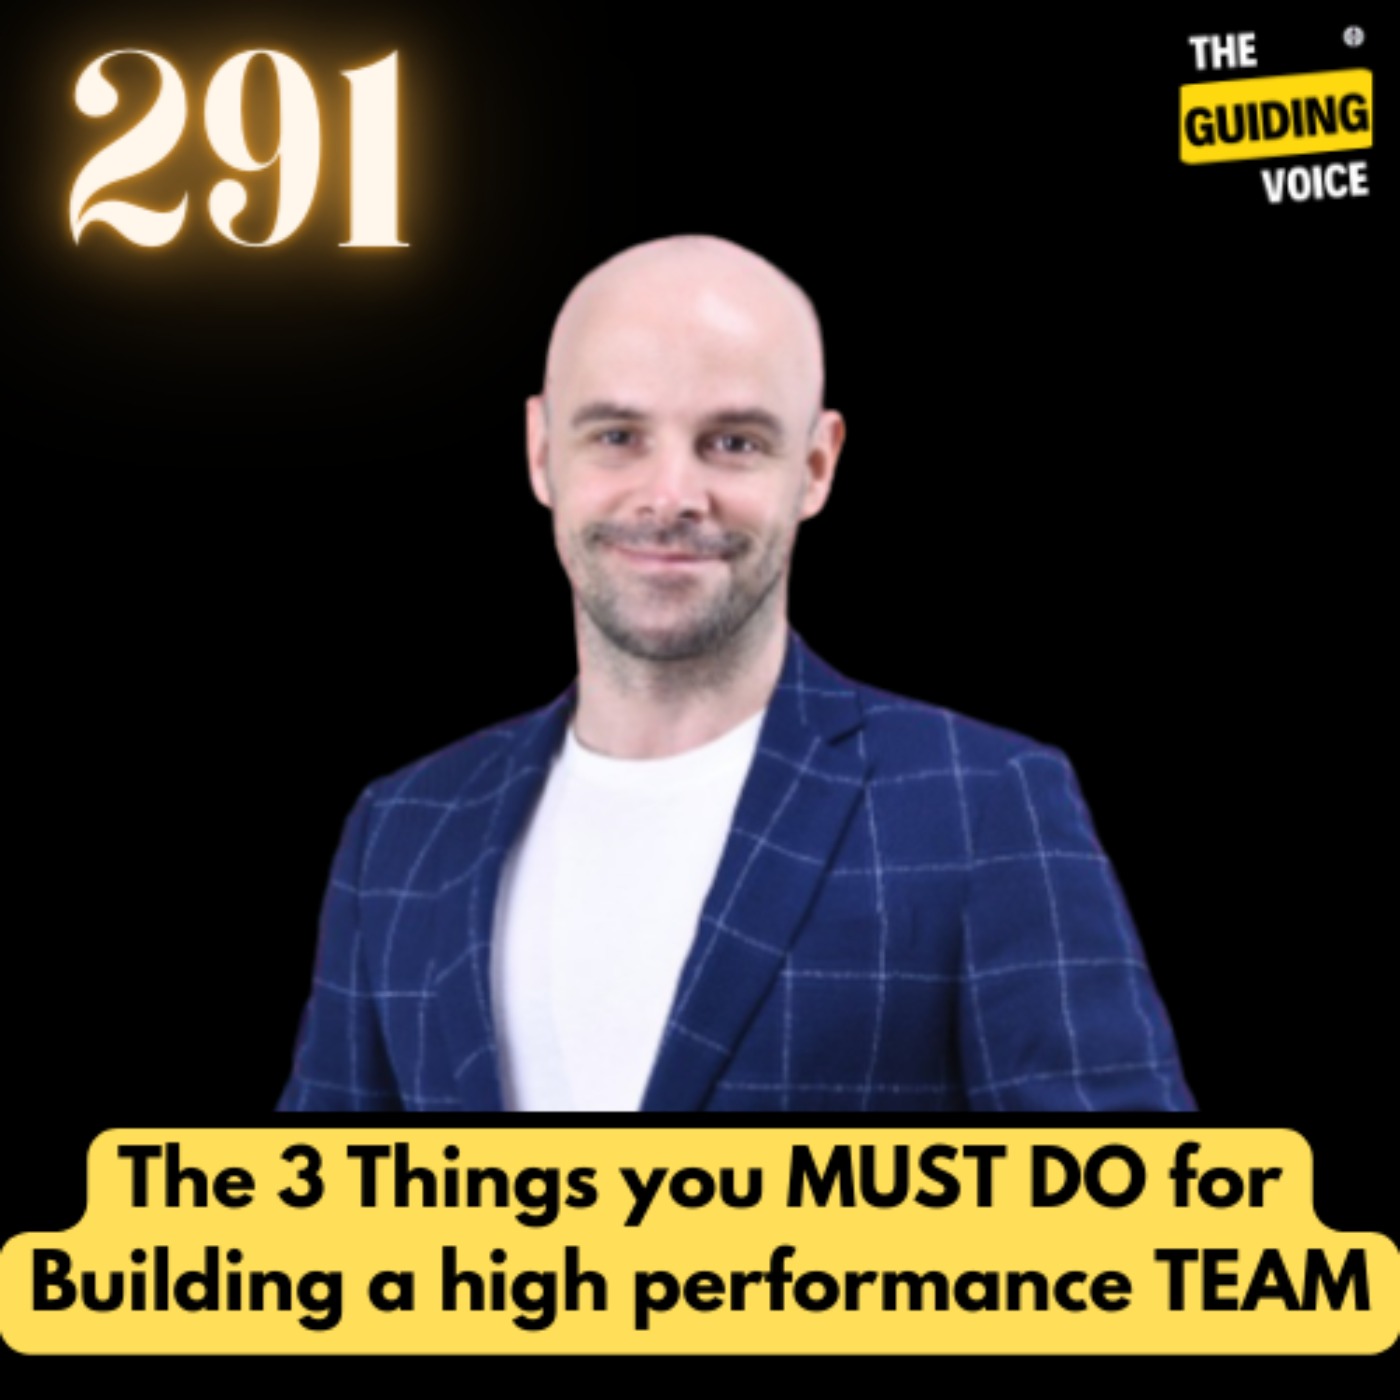 The 3 Things you must DO for Building a high performance team | Evan Tzivanaki | #TGV291